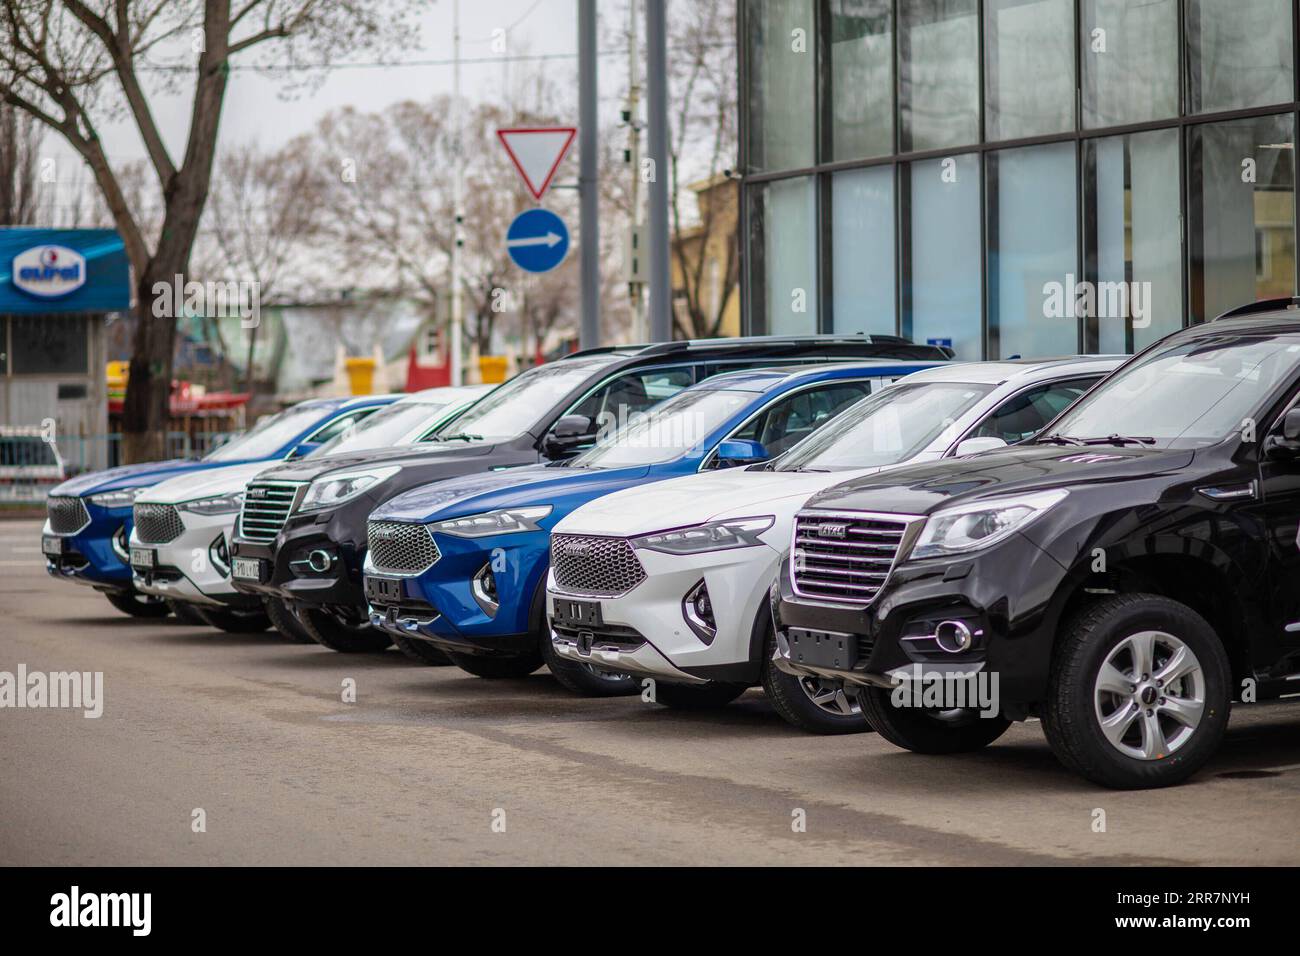 210401 -- ALMATY, April 1, 2021 -- Photo taken on April 1, 2021 shows HAVAL cars outside a dealer shop in Almaty, Kazakhstan. Great Wall Motor Co., Ltd. s HAVAL brand entered the Kazakhstan market on thursday, three main models of crossover vehicles F7, F7x and off-road vehicle H9 officially began the sales to Kazakhstan residents in Almaty. /Handout via Xinhua KAZAKHSTAN-ALMATY-HAVAL-SALE AstanaxMotors PUBLICATIONxNOTxINxCHN Stock Photo